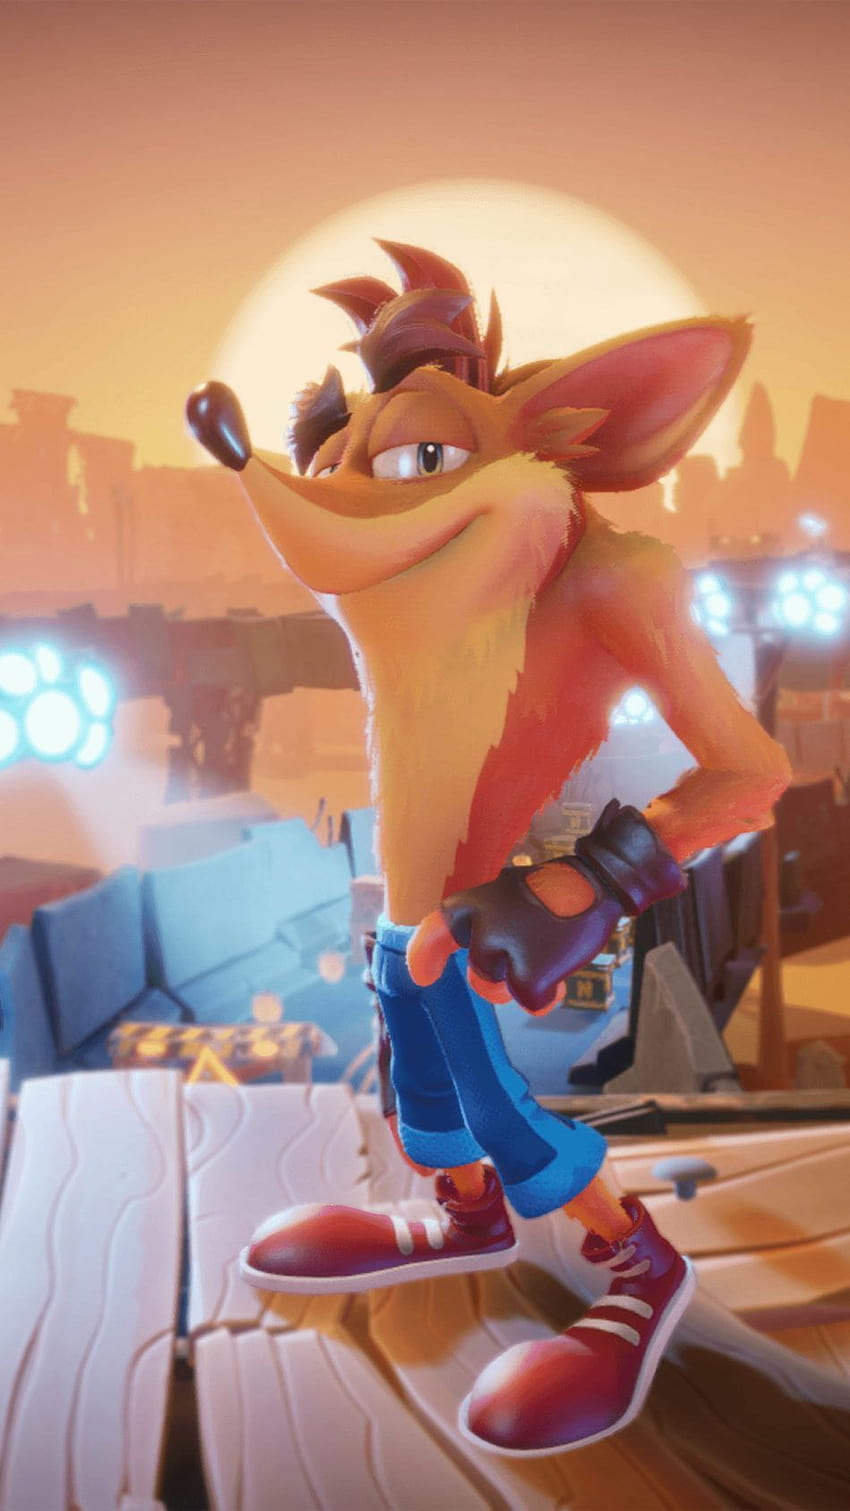 Crash Bandicoot 4 It's About Time Game 2020 Ultra Mobile in 2020, crash bandicoot 4 its about time HD phone wallpaper